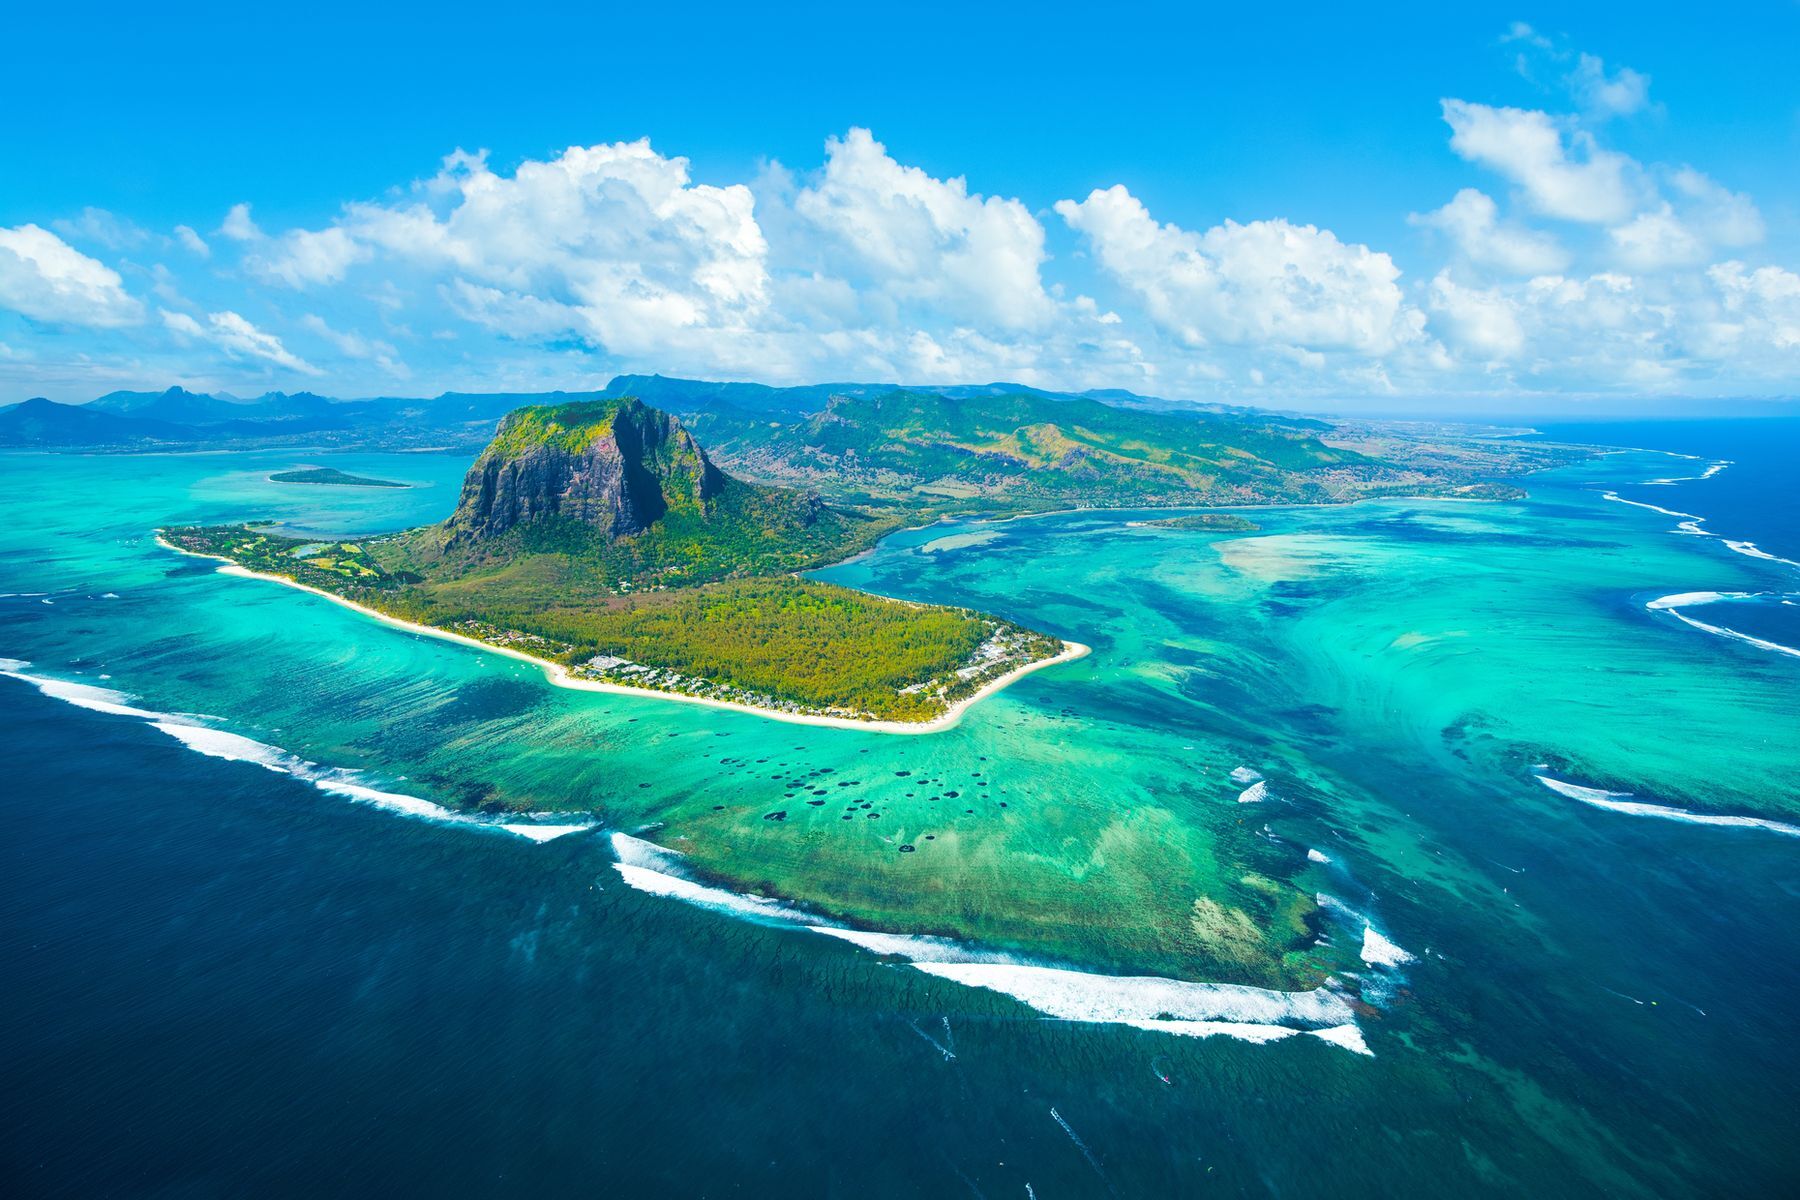 <p>Pearl of the Indian Ocean, <a href="https://mauritiusnow.com/" class="CMY_Link CMY_Valid" rel="noreferrer noopener">Mauritius</a> is well known for its relaxing reefs, lagoons, and <a href="https://mauritiusnow.com/blog/things-to-do-type/sea-beaches/" class="CMY_Link CMY_Valid" rel="noreferrer noopener">breathtaking beaches</a>, such as Trou-aux-Biches and Belle Mare. Those looking to explore Mauritius’s splendid rainforest, replete with waterfalls and lush flora, should add <a href="https://mauritiusnow.com/blog/things-to-do/black-river-gorges-national-park/" class="CMY_Link CMY_Valid" rel="noreferrer noopener">Black River Gorges National Park</a> to their itinerary.</p>